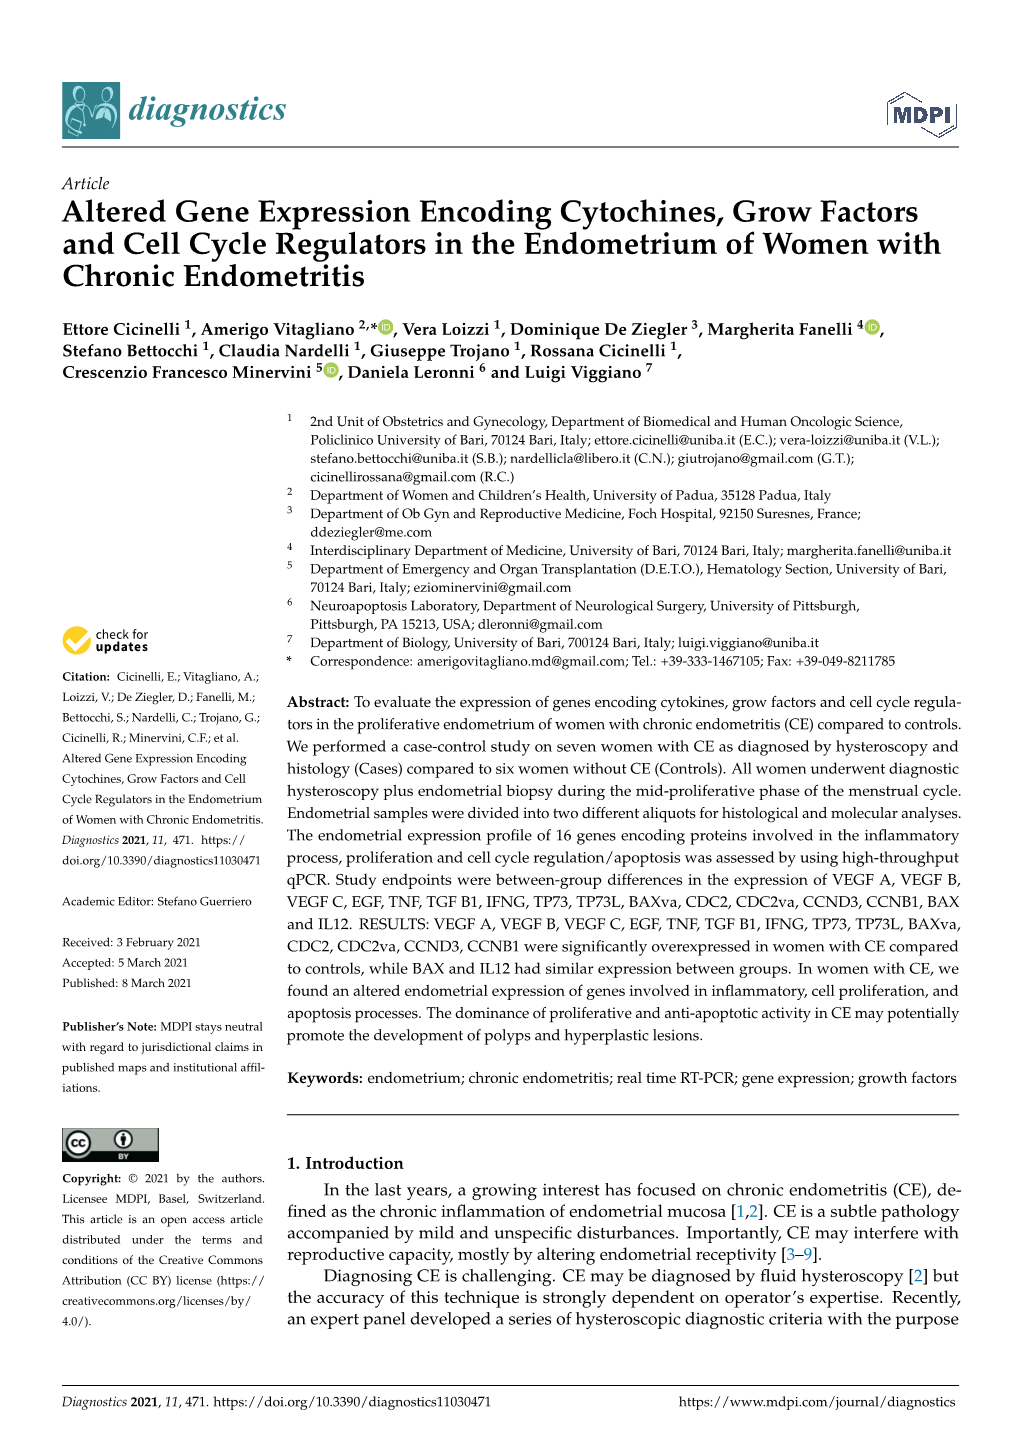 Altered Gene Expression Encoding Cytochines, Grow Factors and Cell Cycle Regulators in the Endometrium of Women with Chronic Endometritis